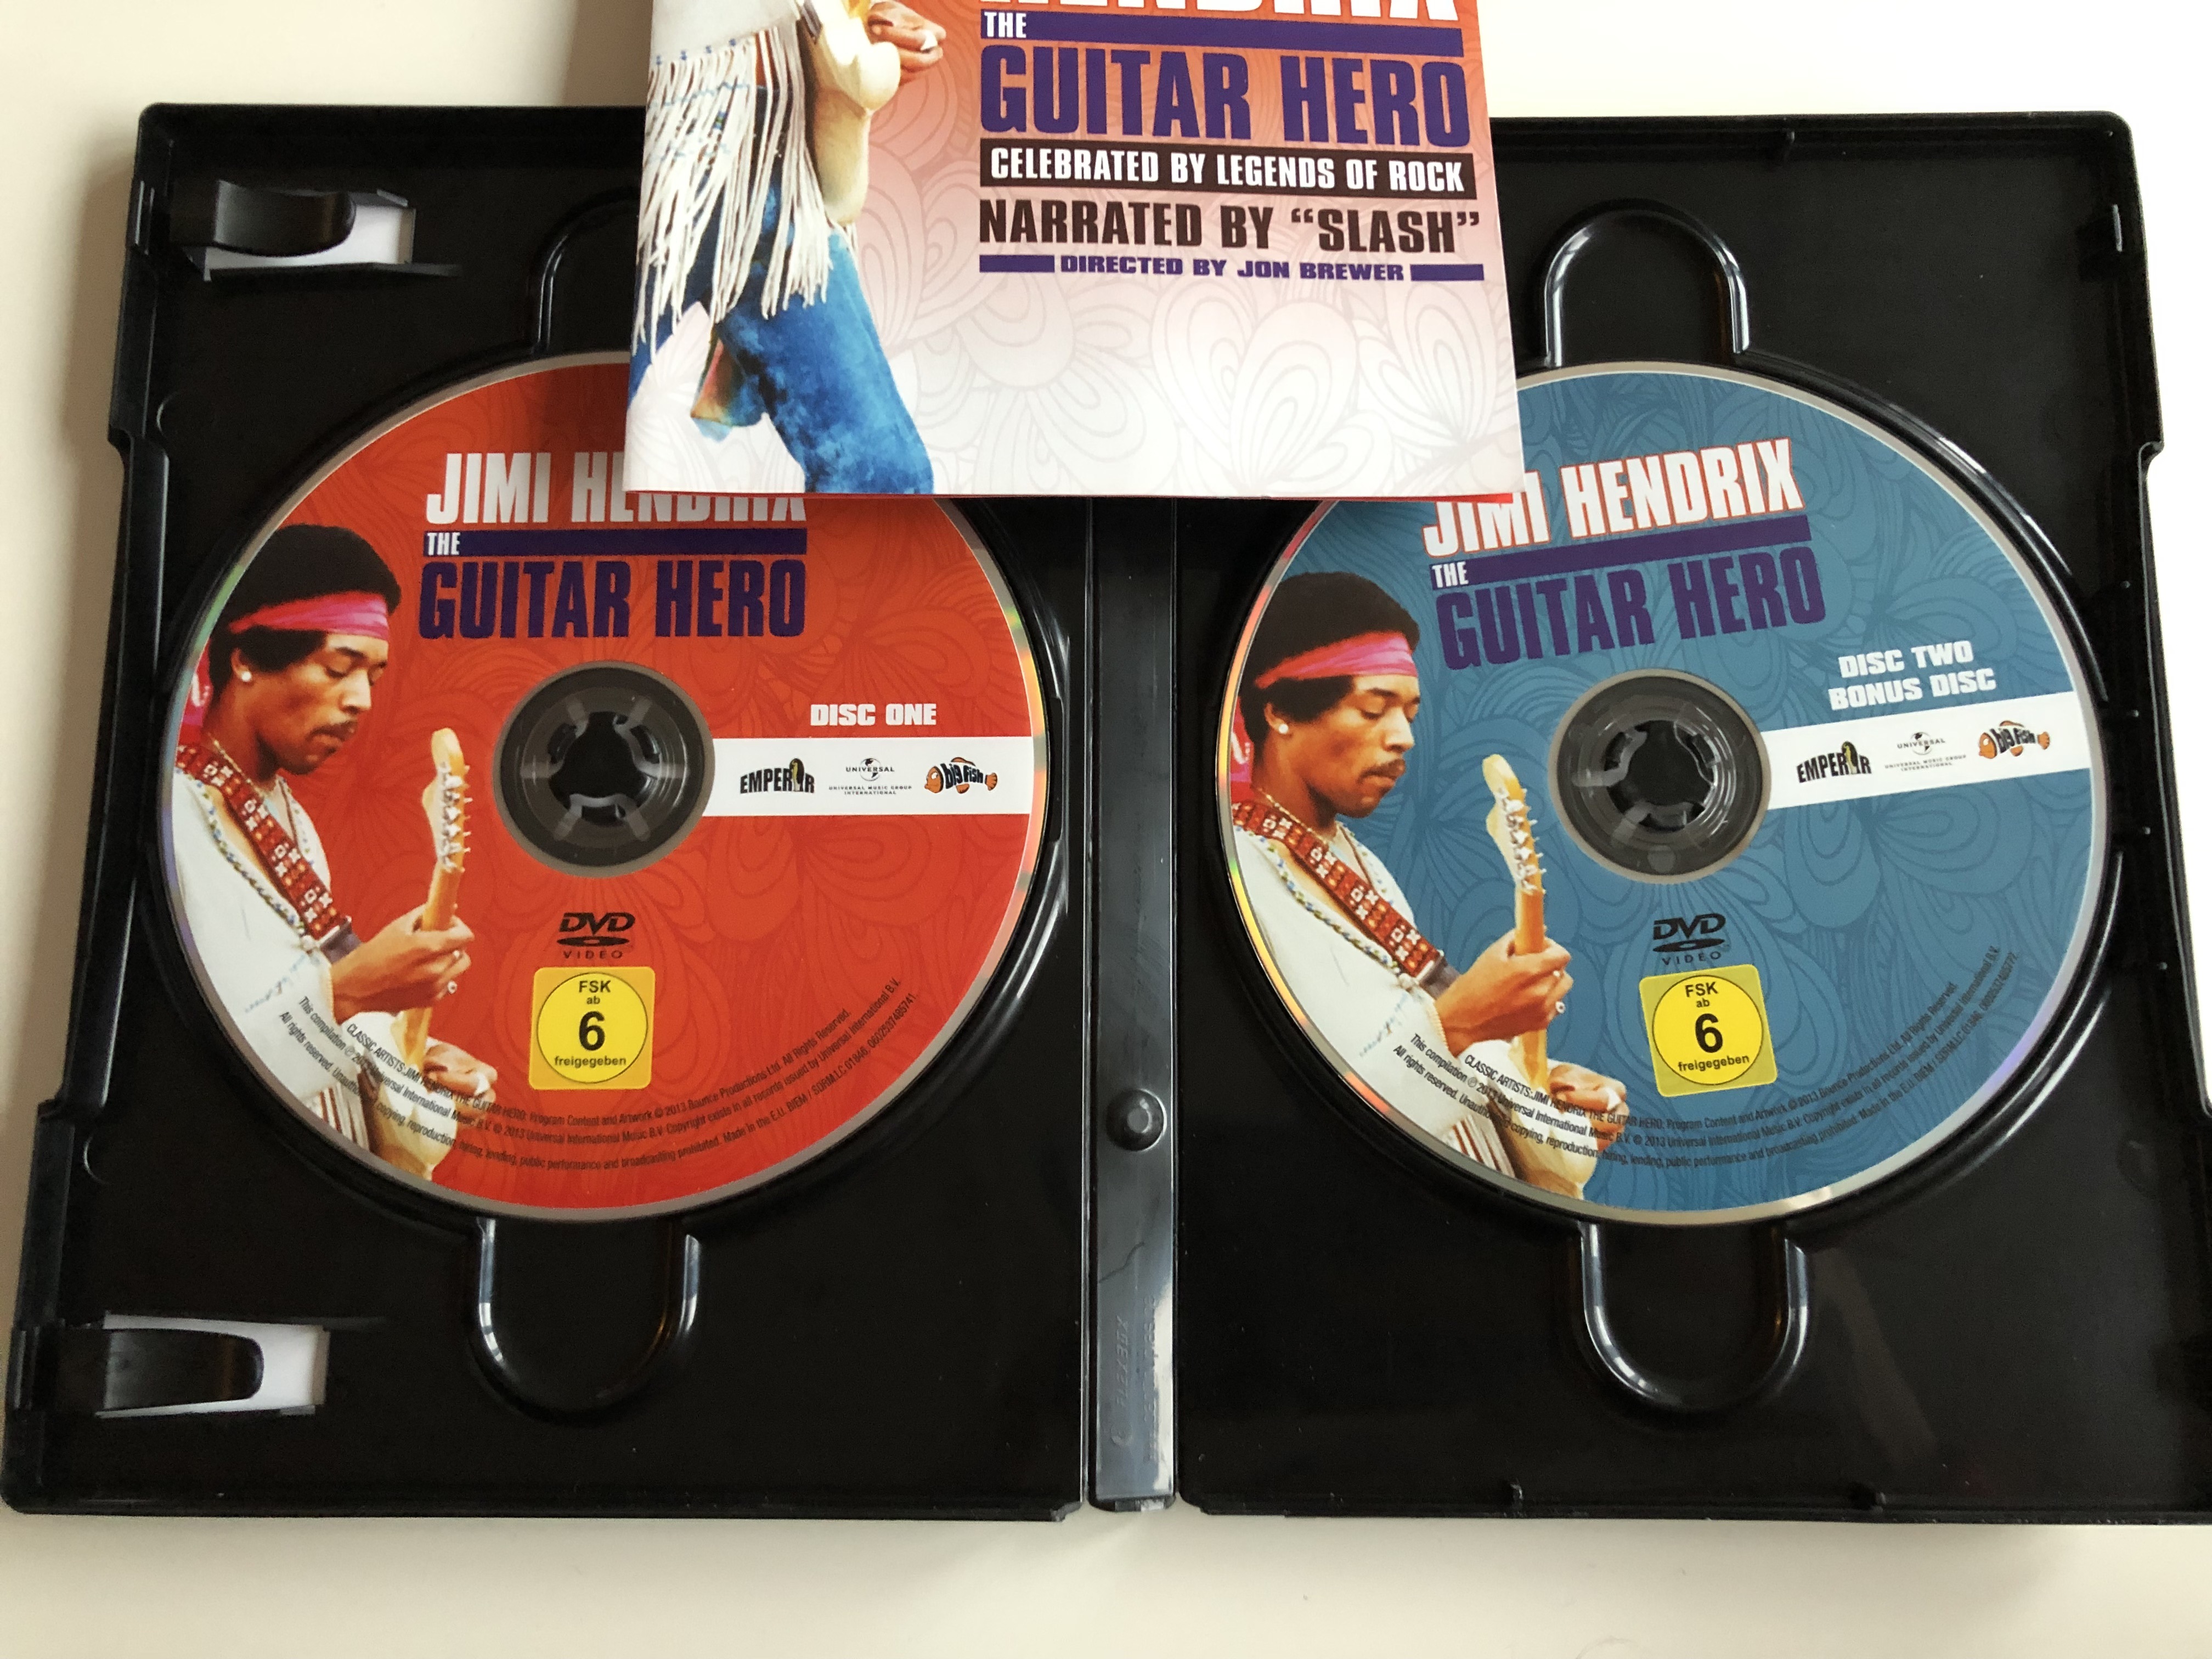 jimi-hendrix-the-guitar-hero-dvd-2013-celebrated-by-legends-of-rock-directed-by-jon-brewer-narrated-by-slash-director-s-cut-2-dvd-set-including-5-hrs-of-bonus-features-3-.jpg